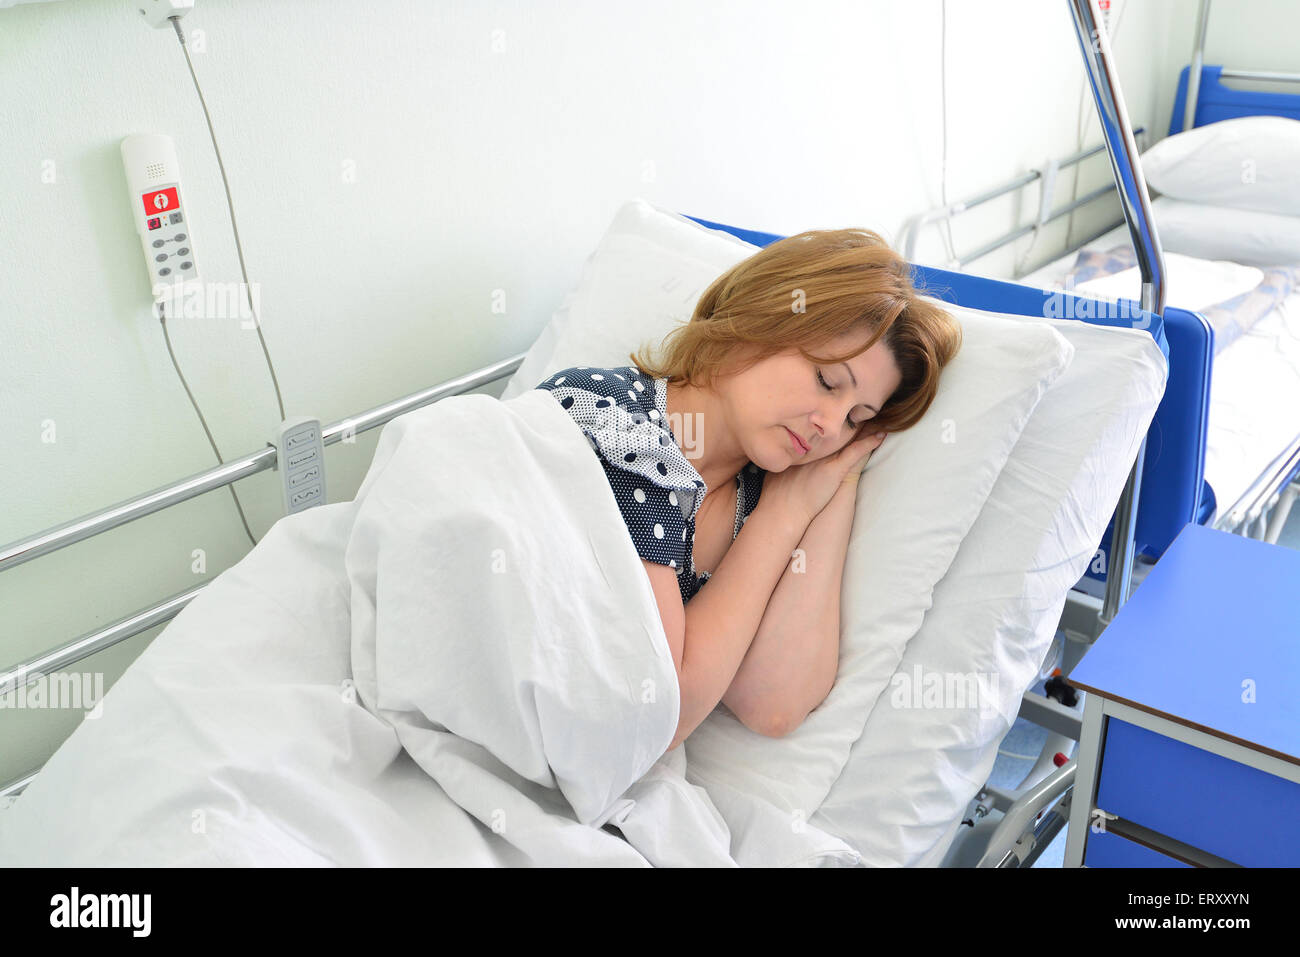 Female patient lying on a bed in hospital ward Banque D'Images